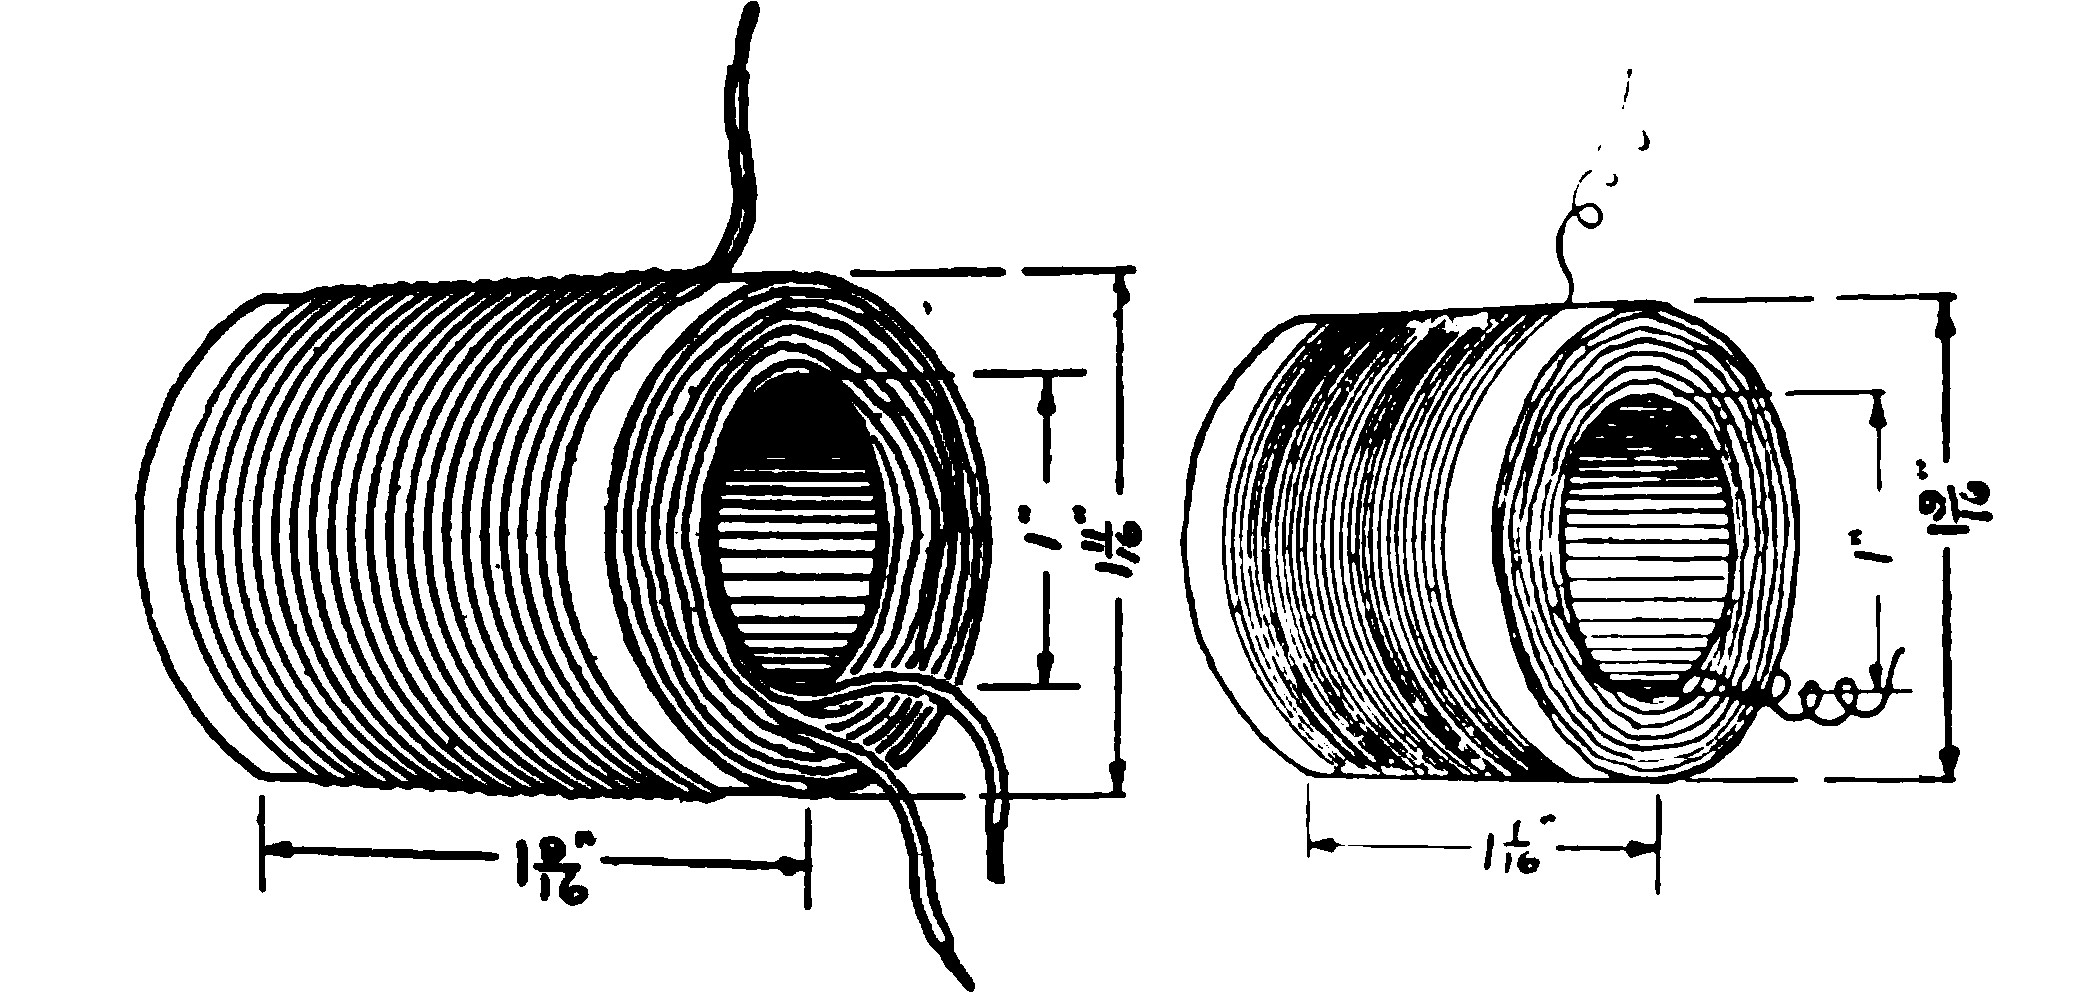 FIG. 61.—Details of the Primary and Secondary Windings.